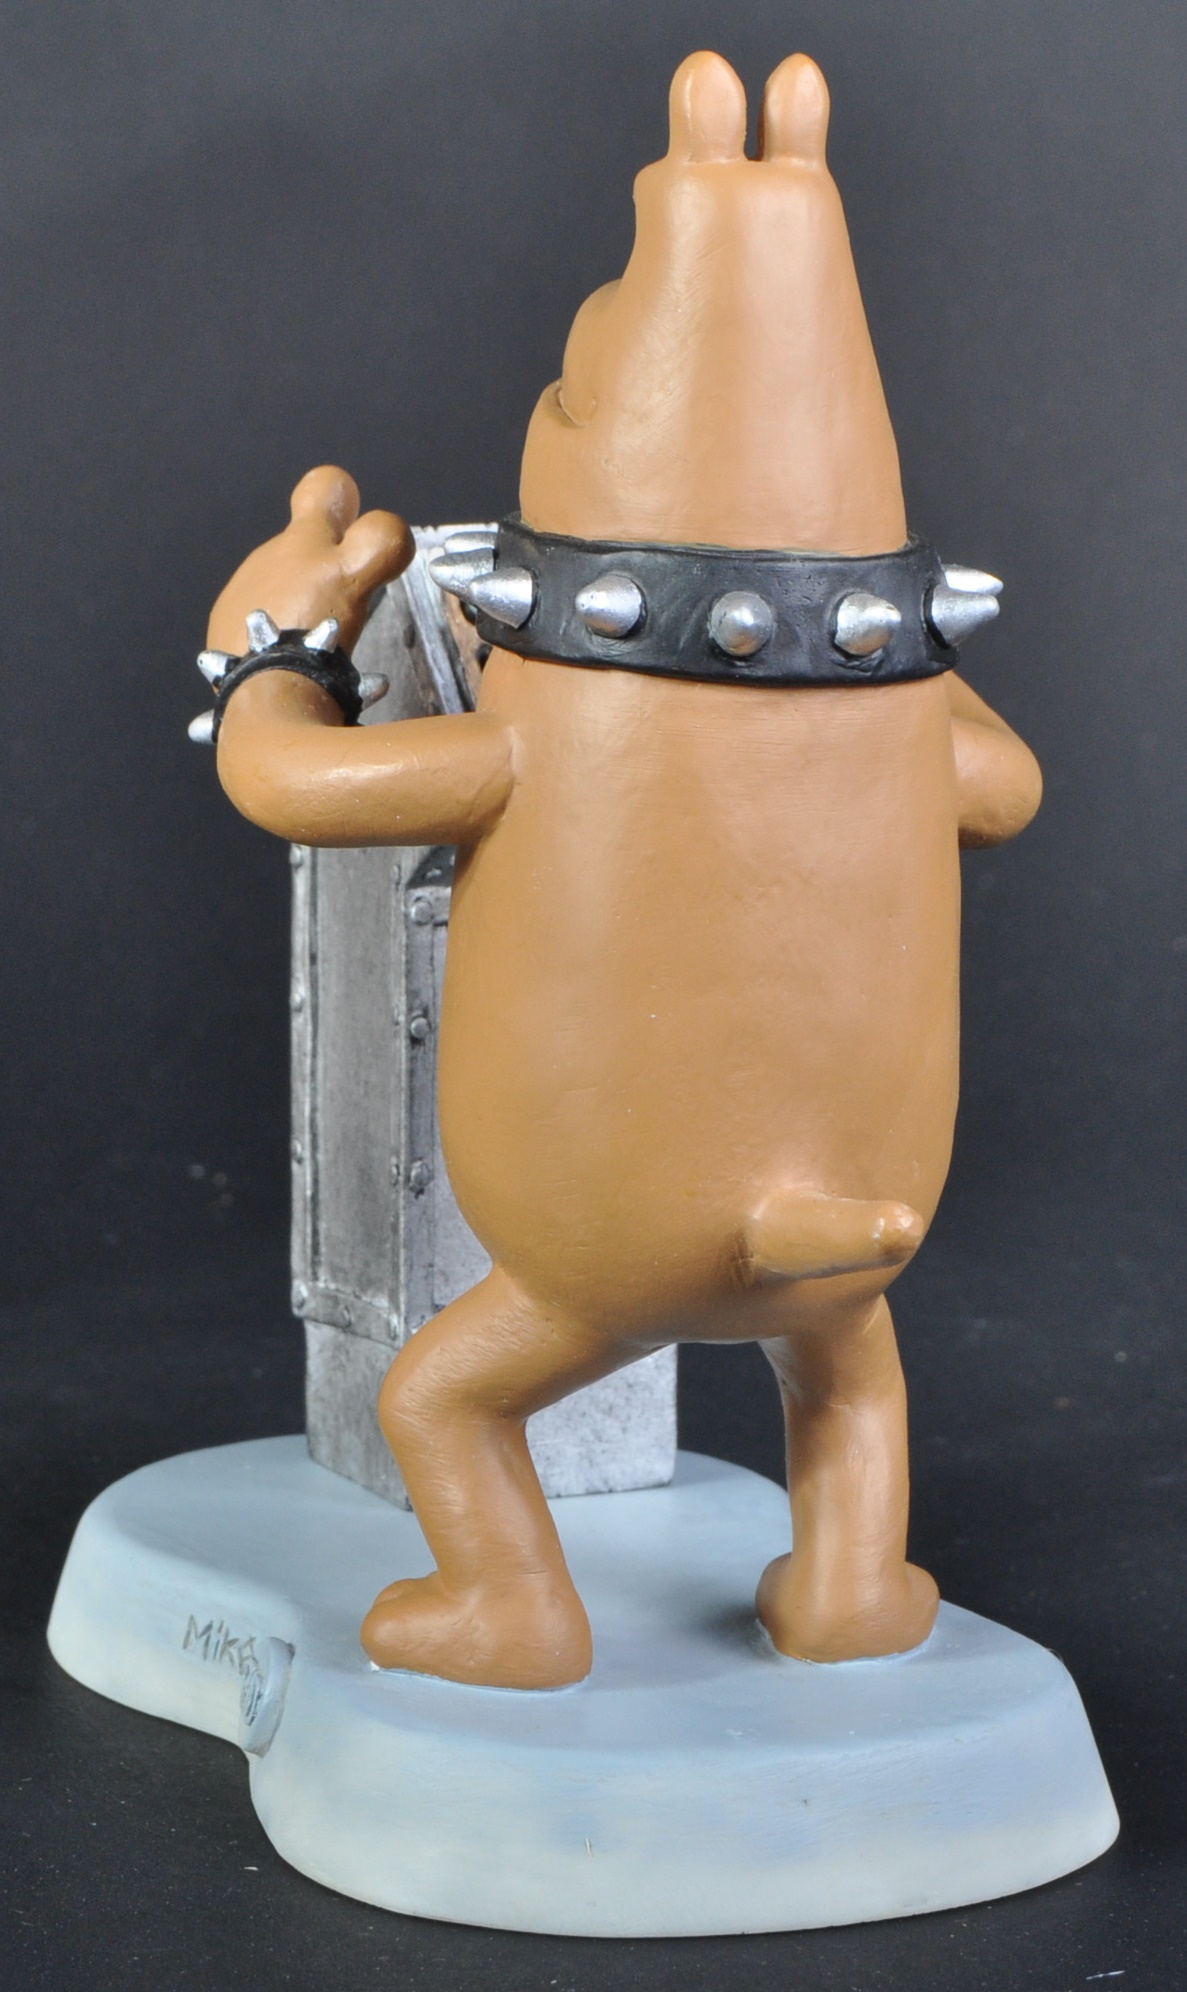 WALLACE & GROMIT - ROBERT HARROP - LIMITED EDITION FIGURINE - Image 3 of 4